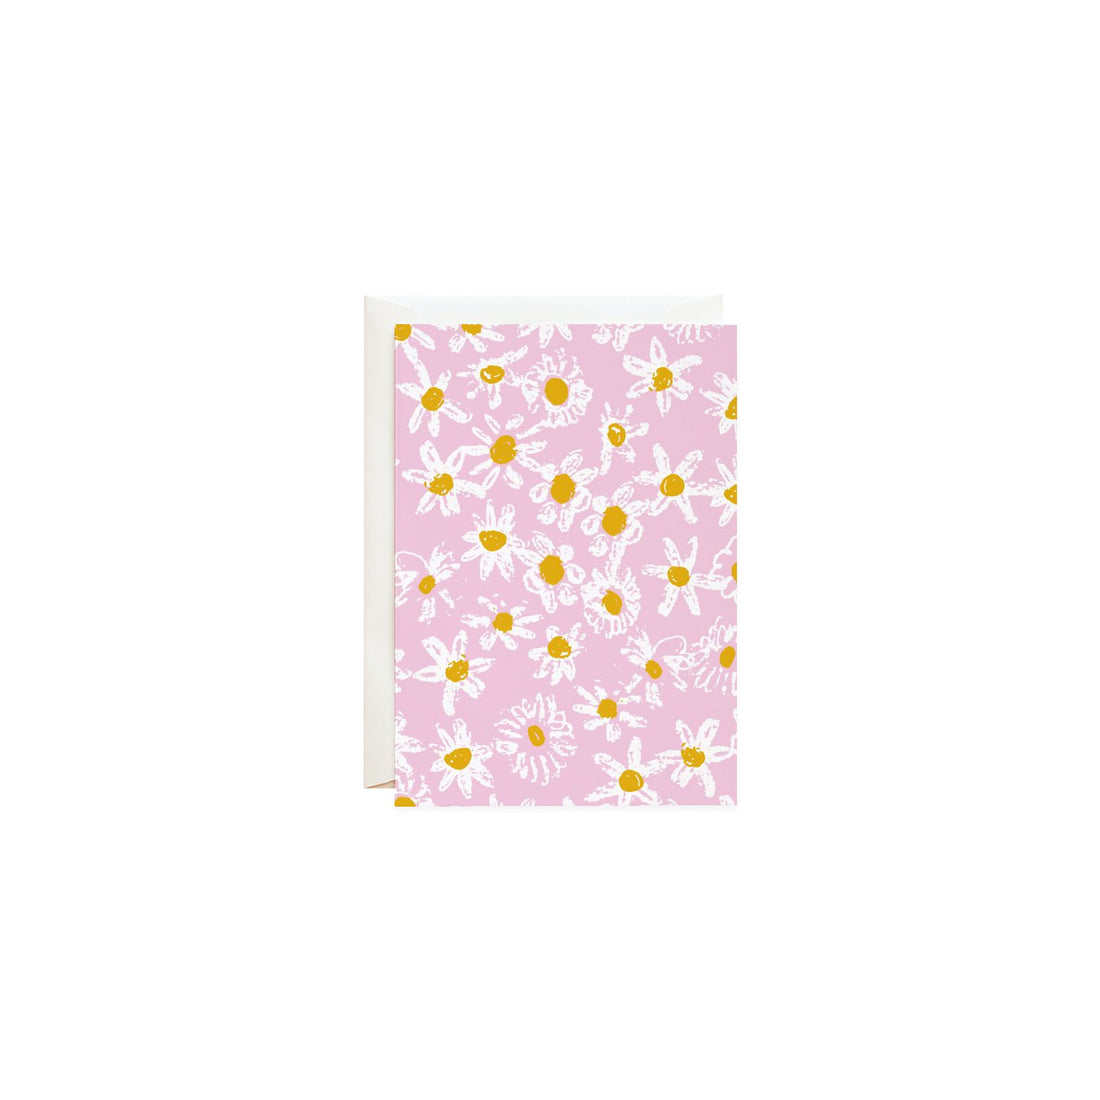 pink daisy fields greeting card